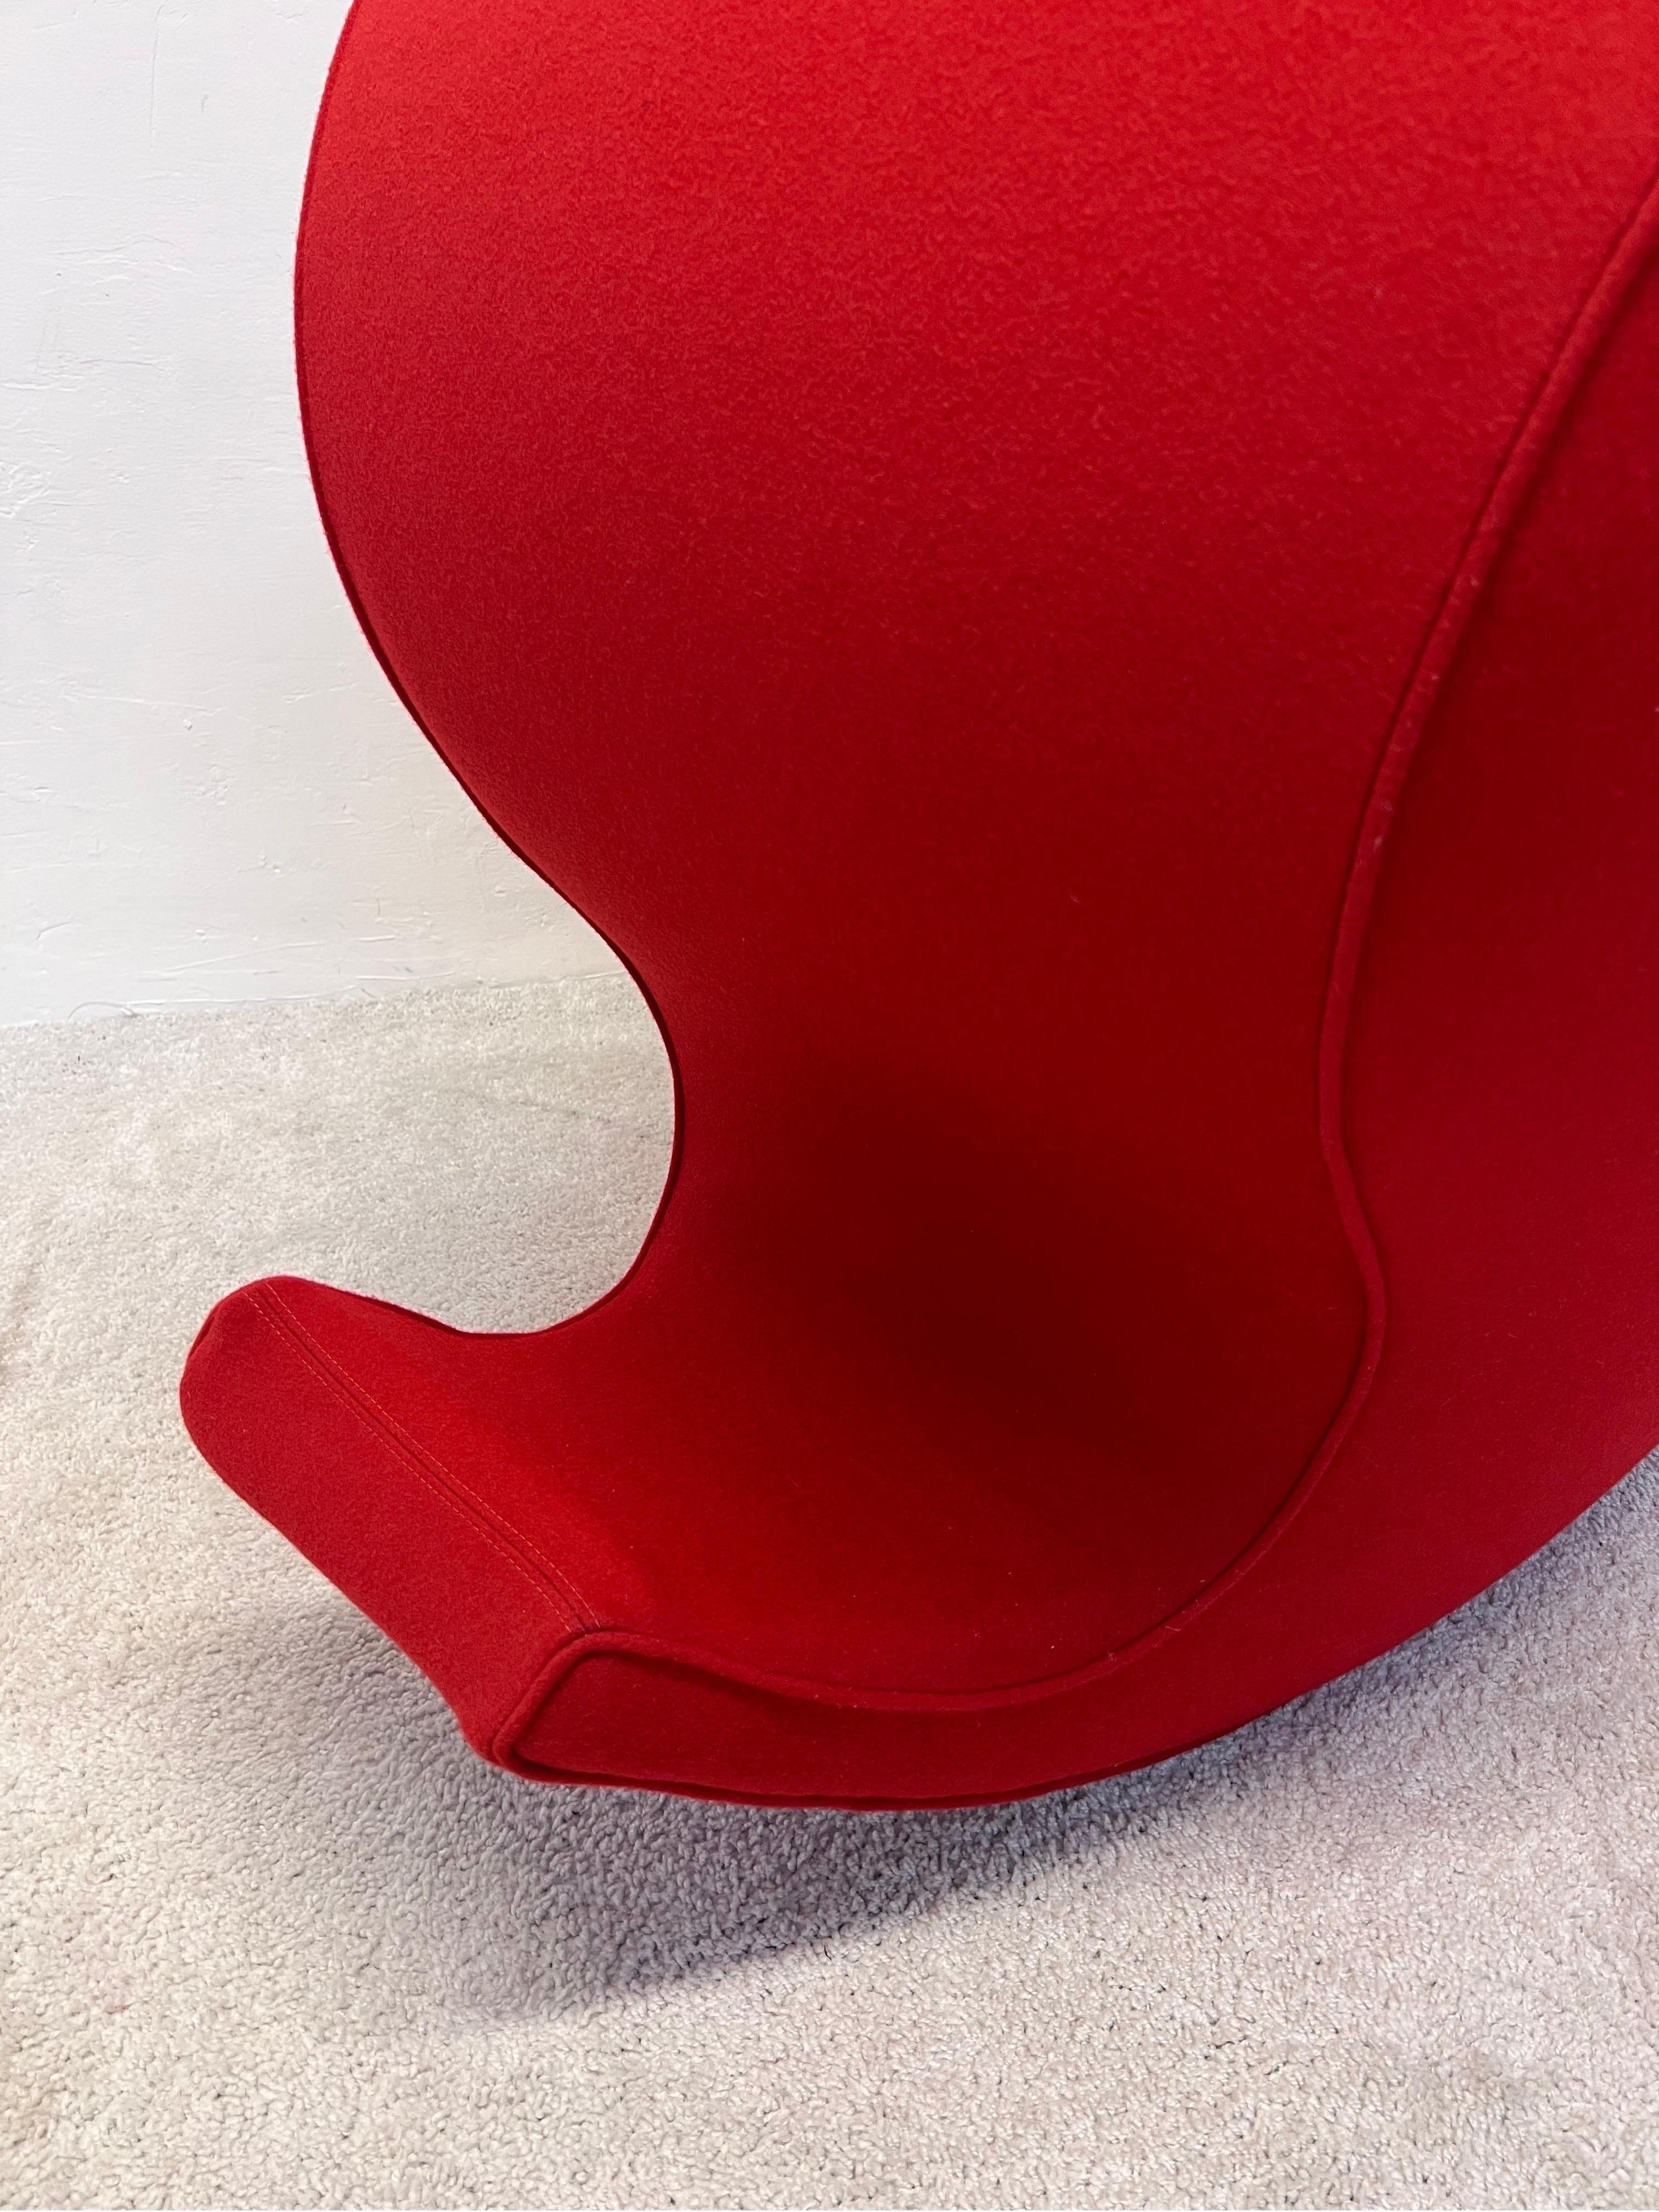 Ron Arad Spring Collection Soft Heart Chair for Moroso For Sale 4